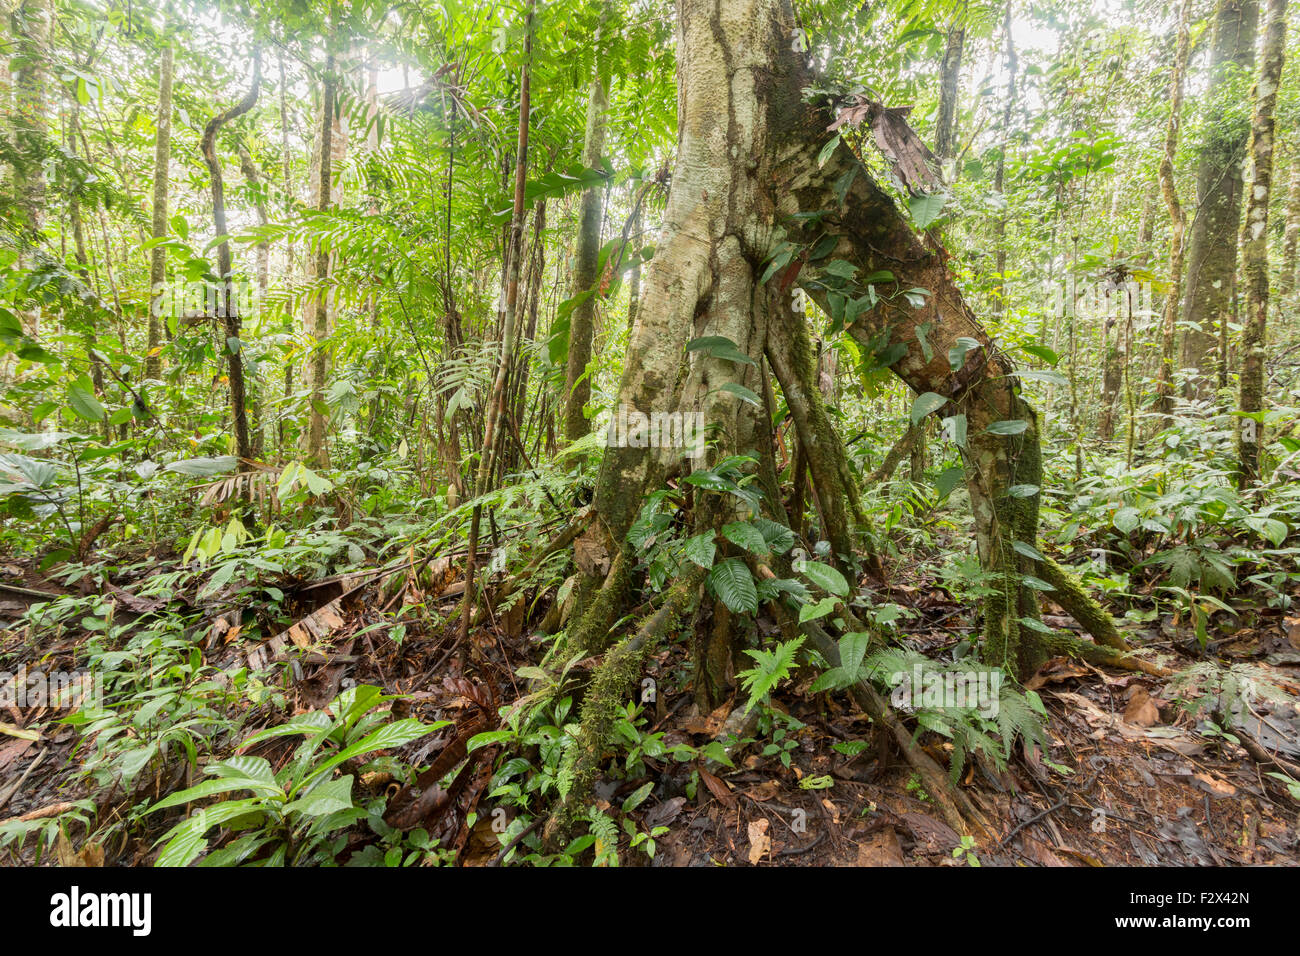 Cecropia tree, a secondary forest species, with stilt roots. In the Ecuadorian Amazon. HDR image Stock Photo